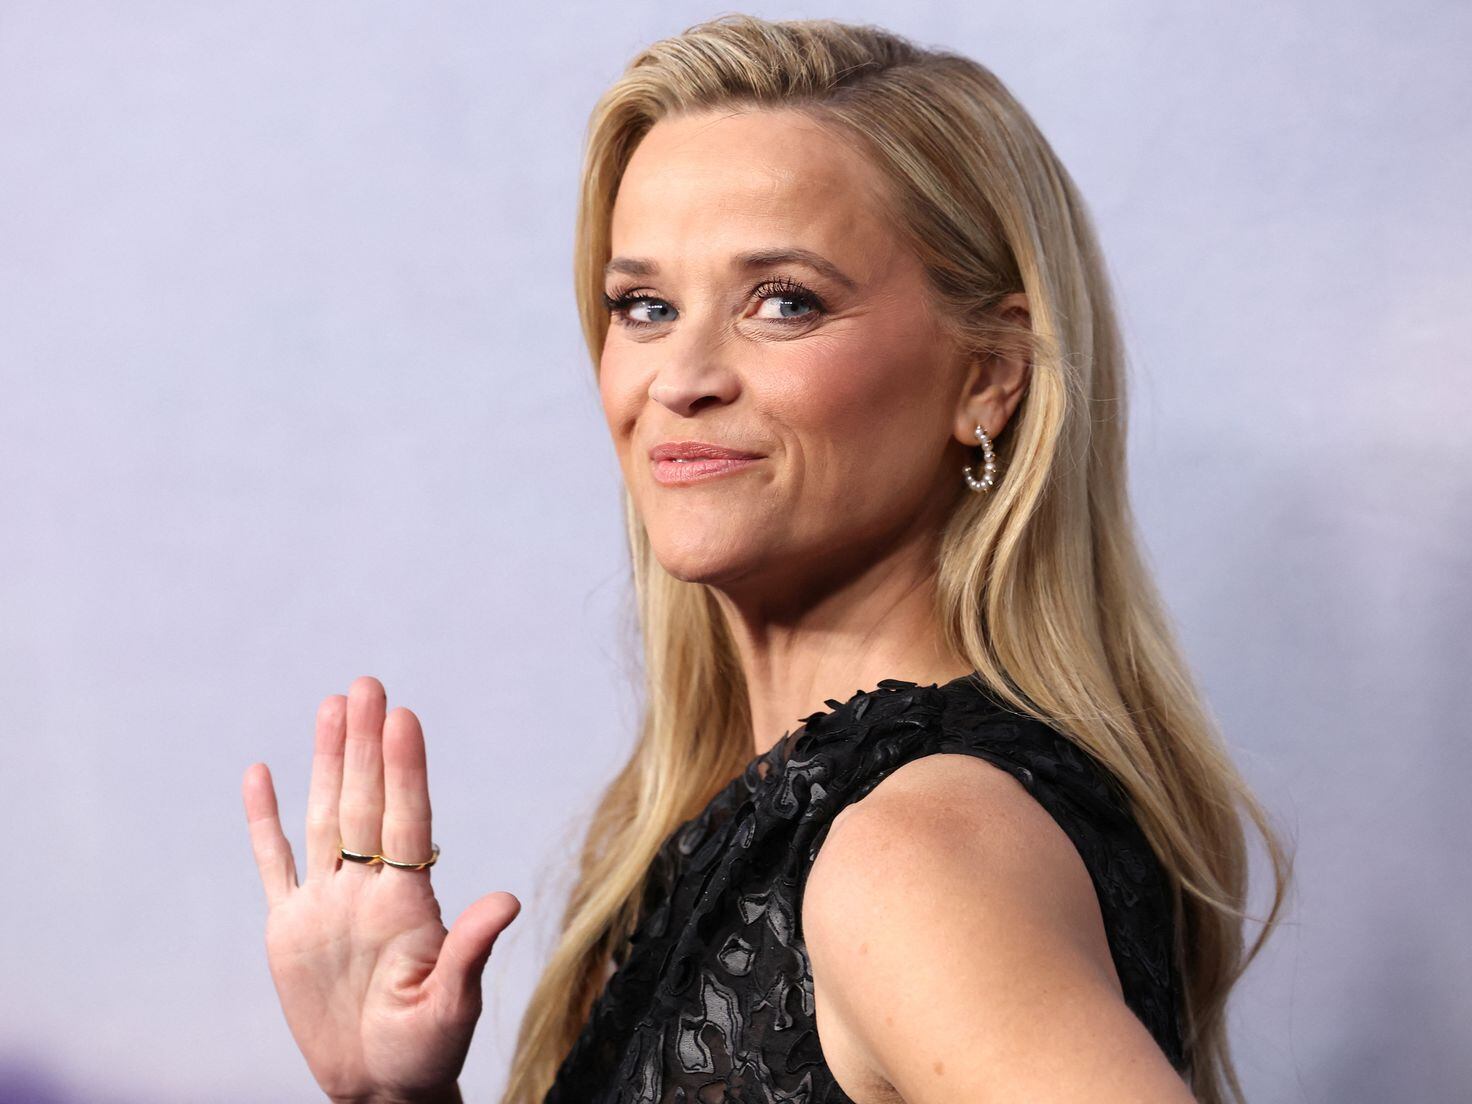 Reese Witherspoon looks overjoyed in first red carpet appearance